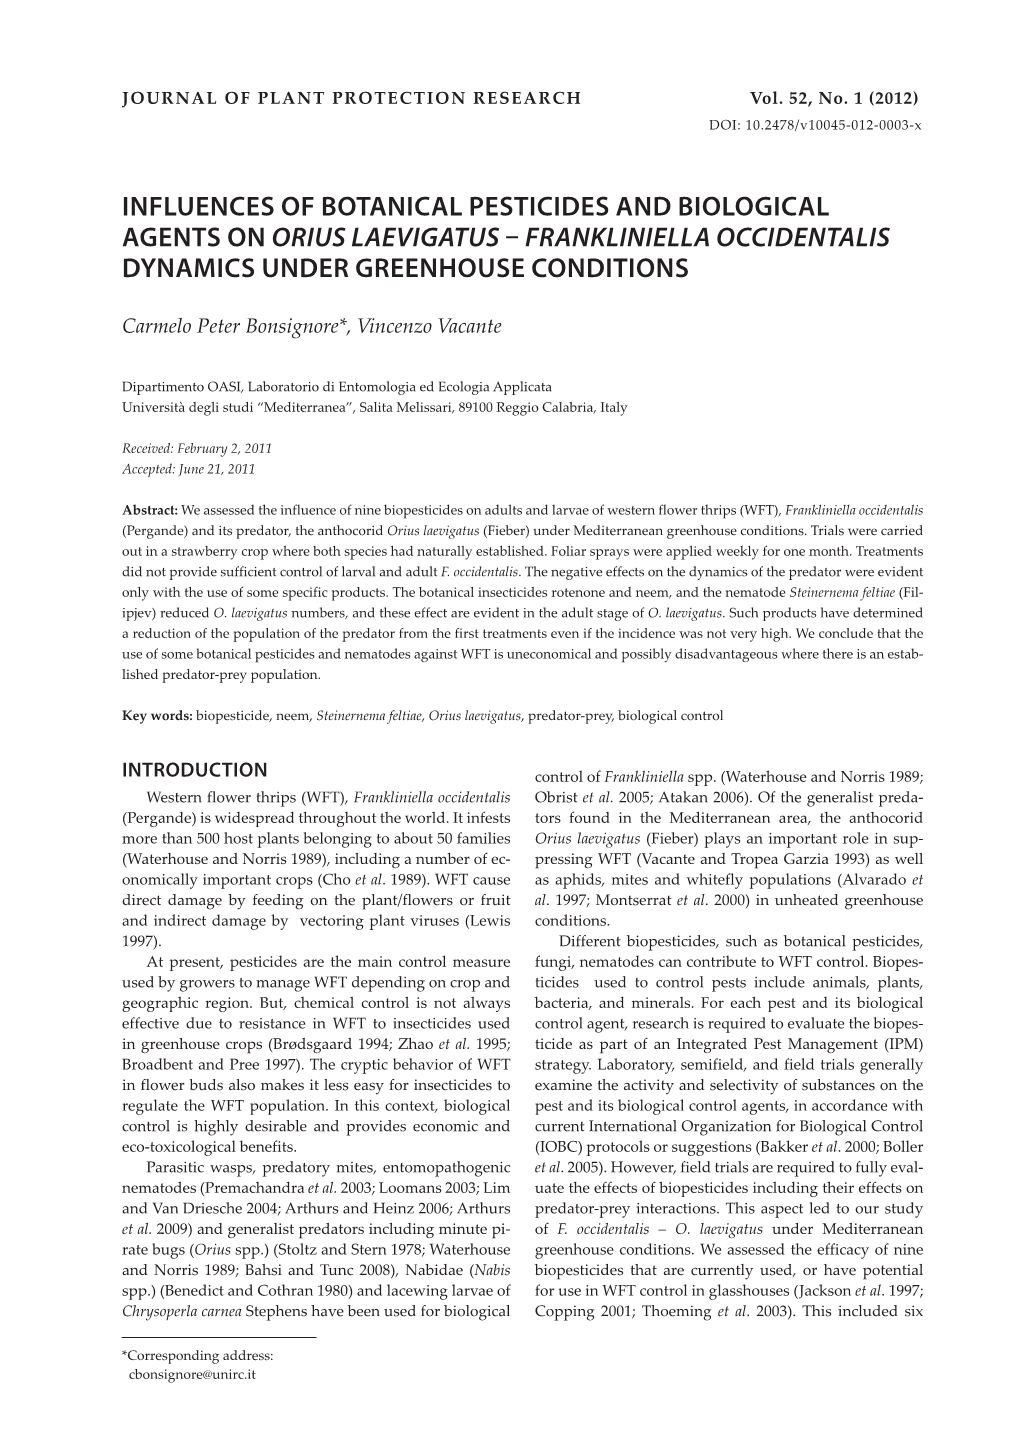 Influences of Botanical Pesticides and Biological Agents on Orius Laevigatus – Frankliniella Occidentalis Dynamics Under Greenhouse Conditions